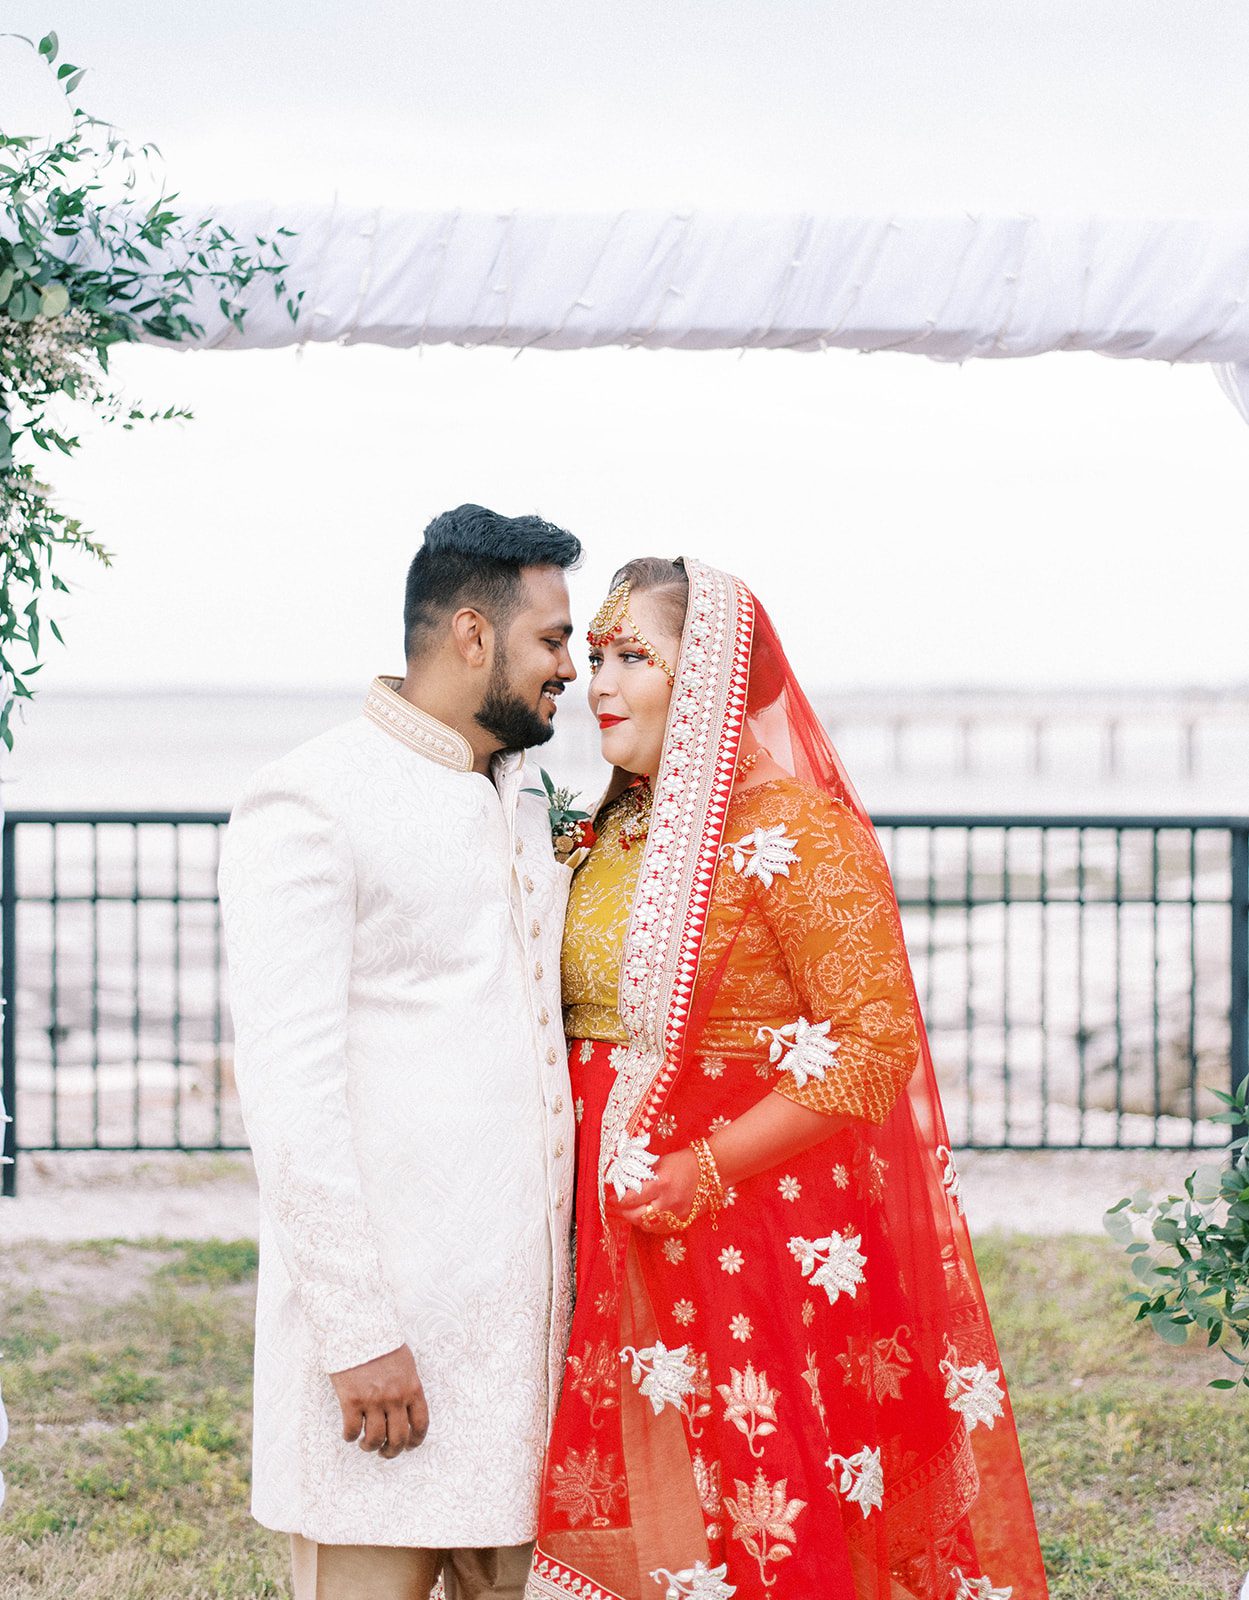 Indian bride and groom standing under a wedding arc hnext to the ocean as they look into each others eyes and smile while wearing their tradtional Indian wedding apparel